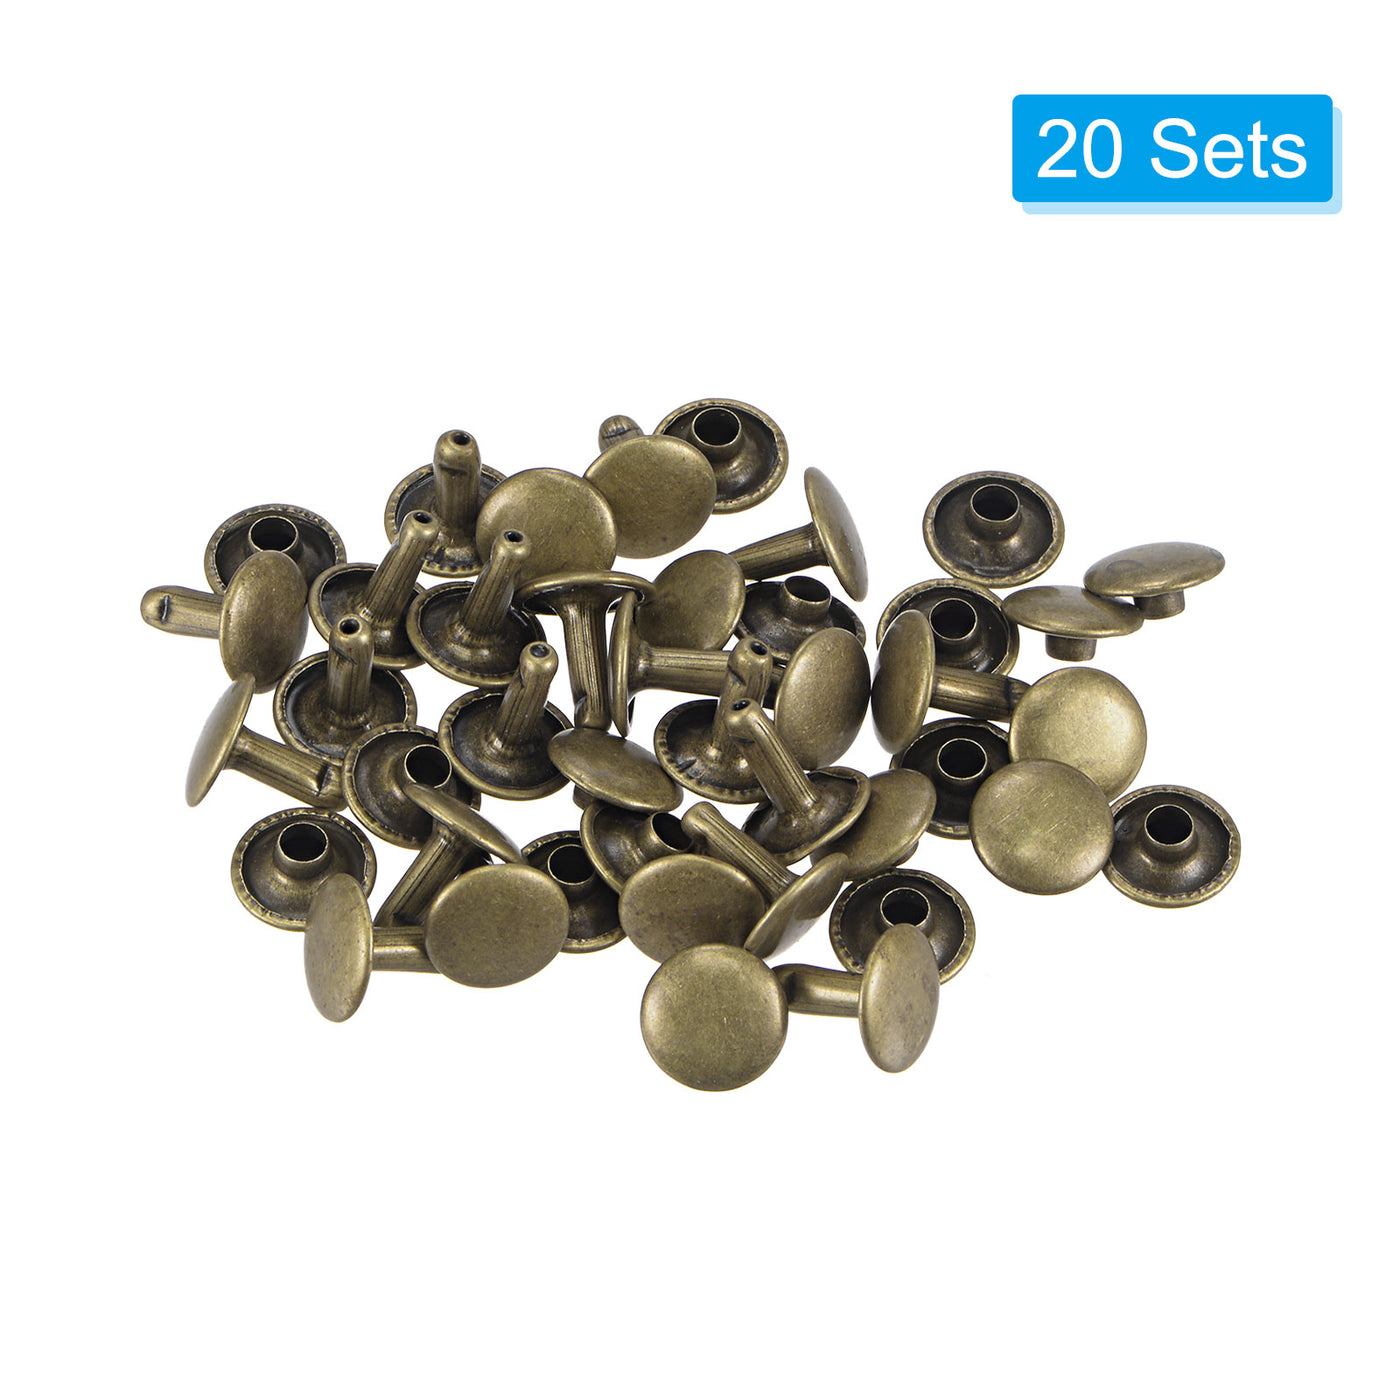 uxcell Uxcell 20 Sets Leather Rivets Bronze Tone 10mm Double Cap Brass Rivet Leather Studs